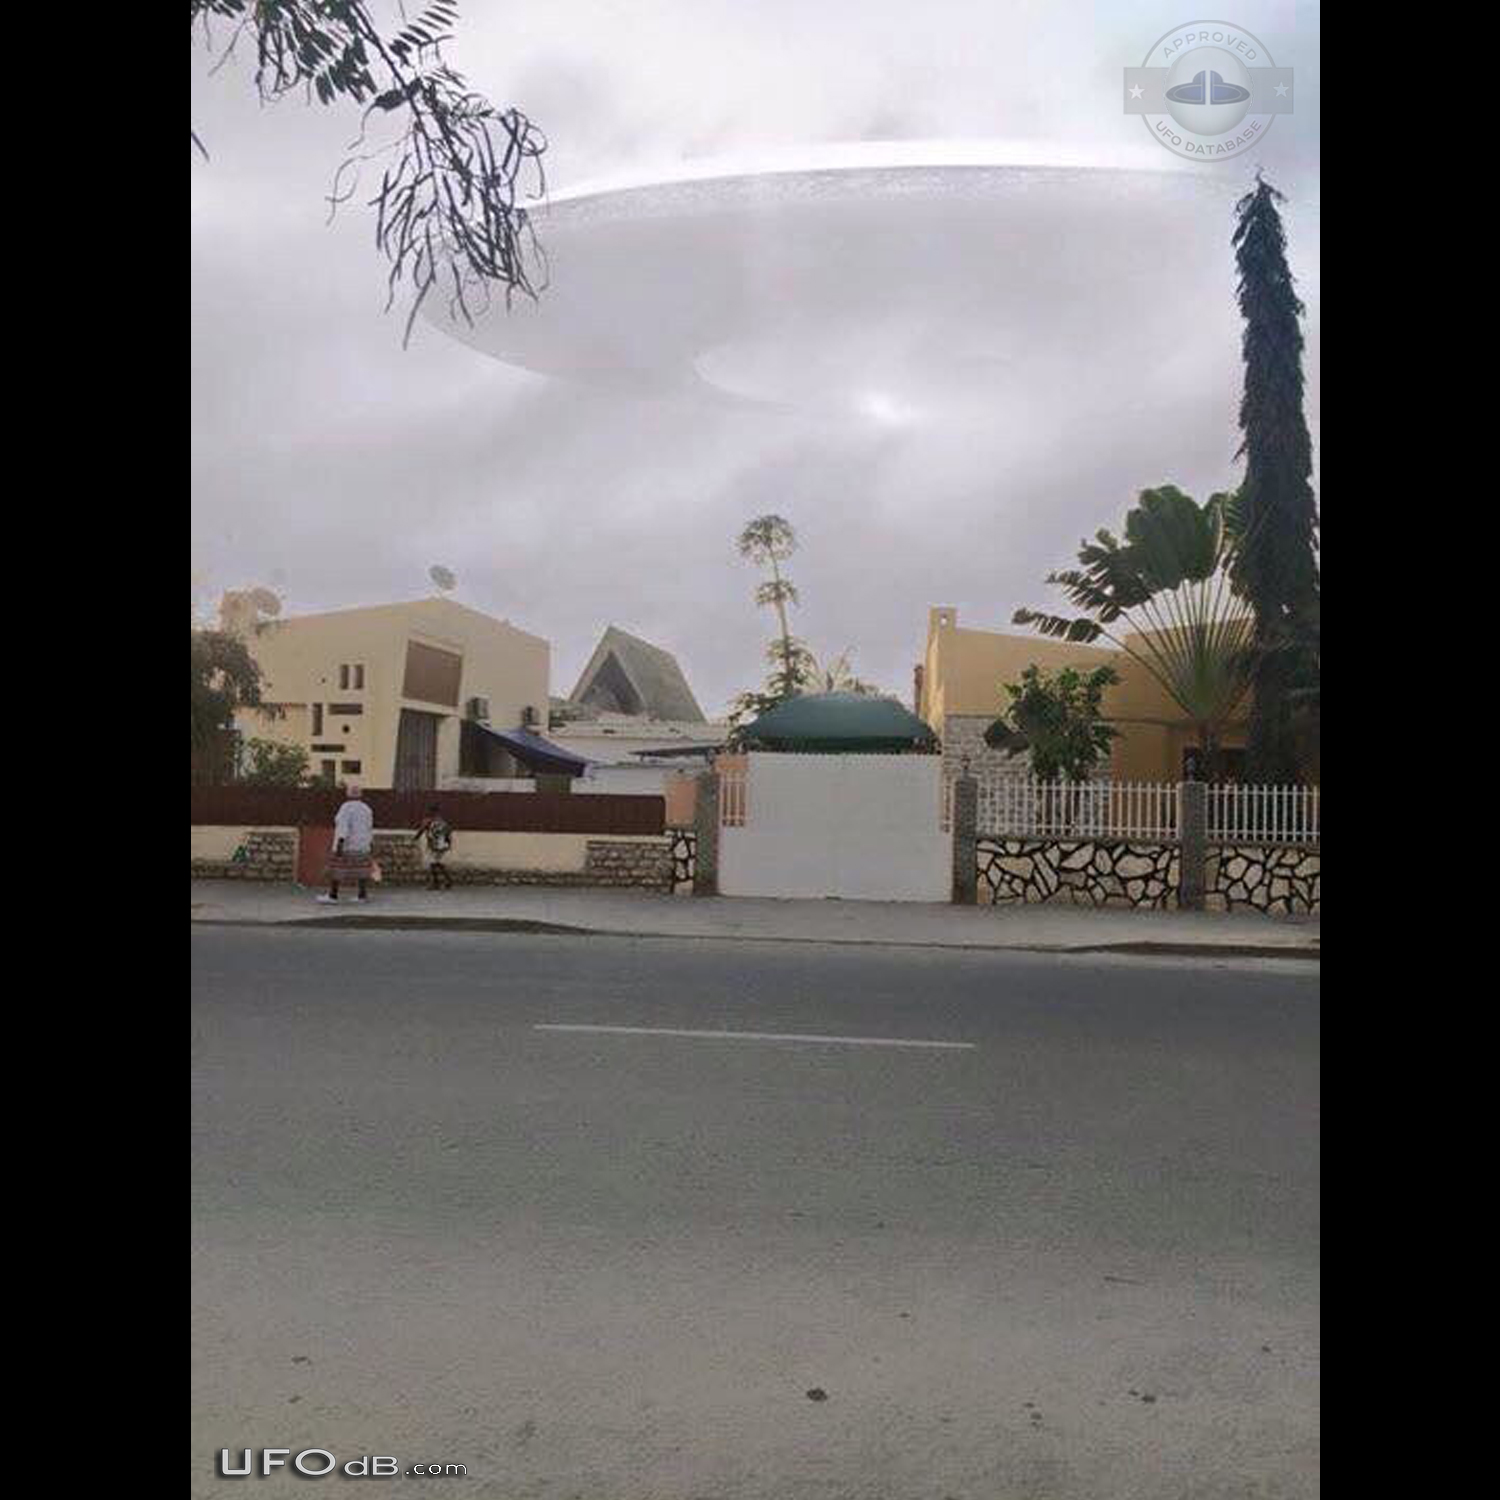 Angola people UFO Sighting seen in the pics kind of spaceship Benguela UFO Picture #738-1